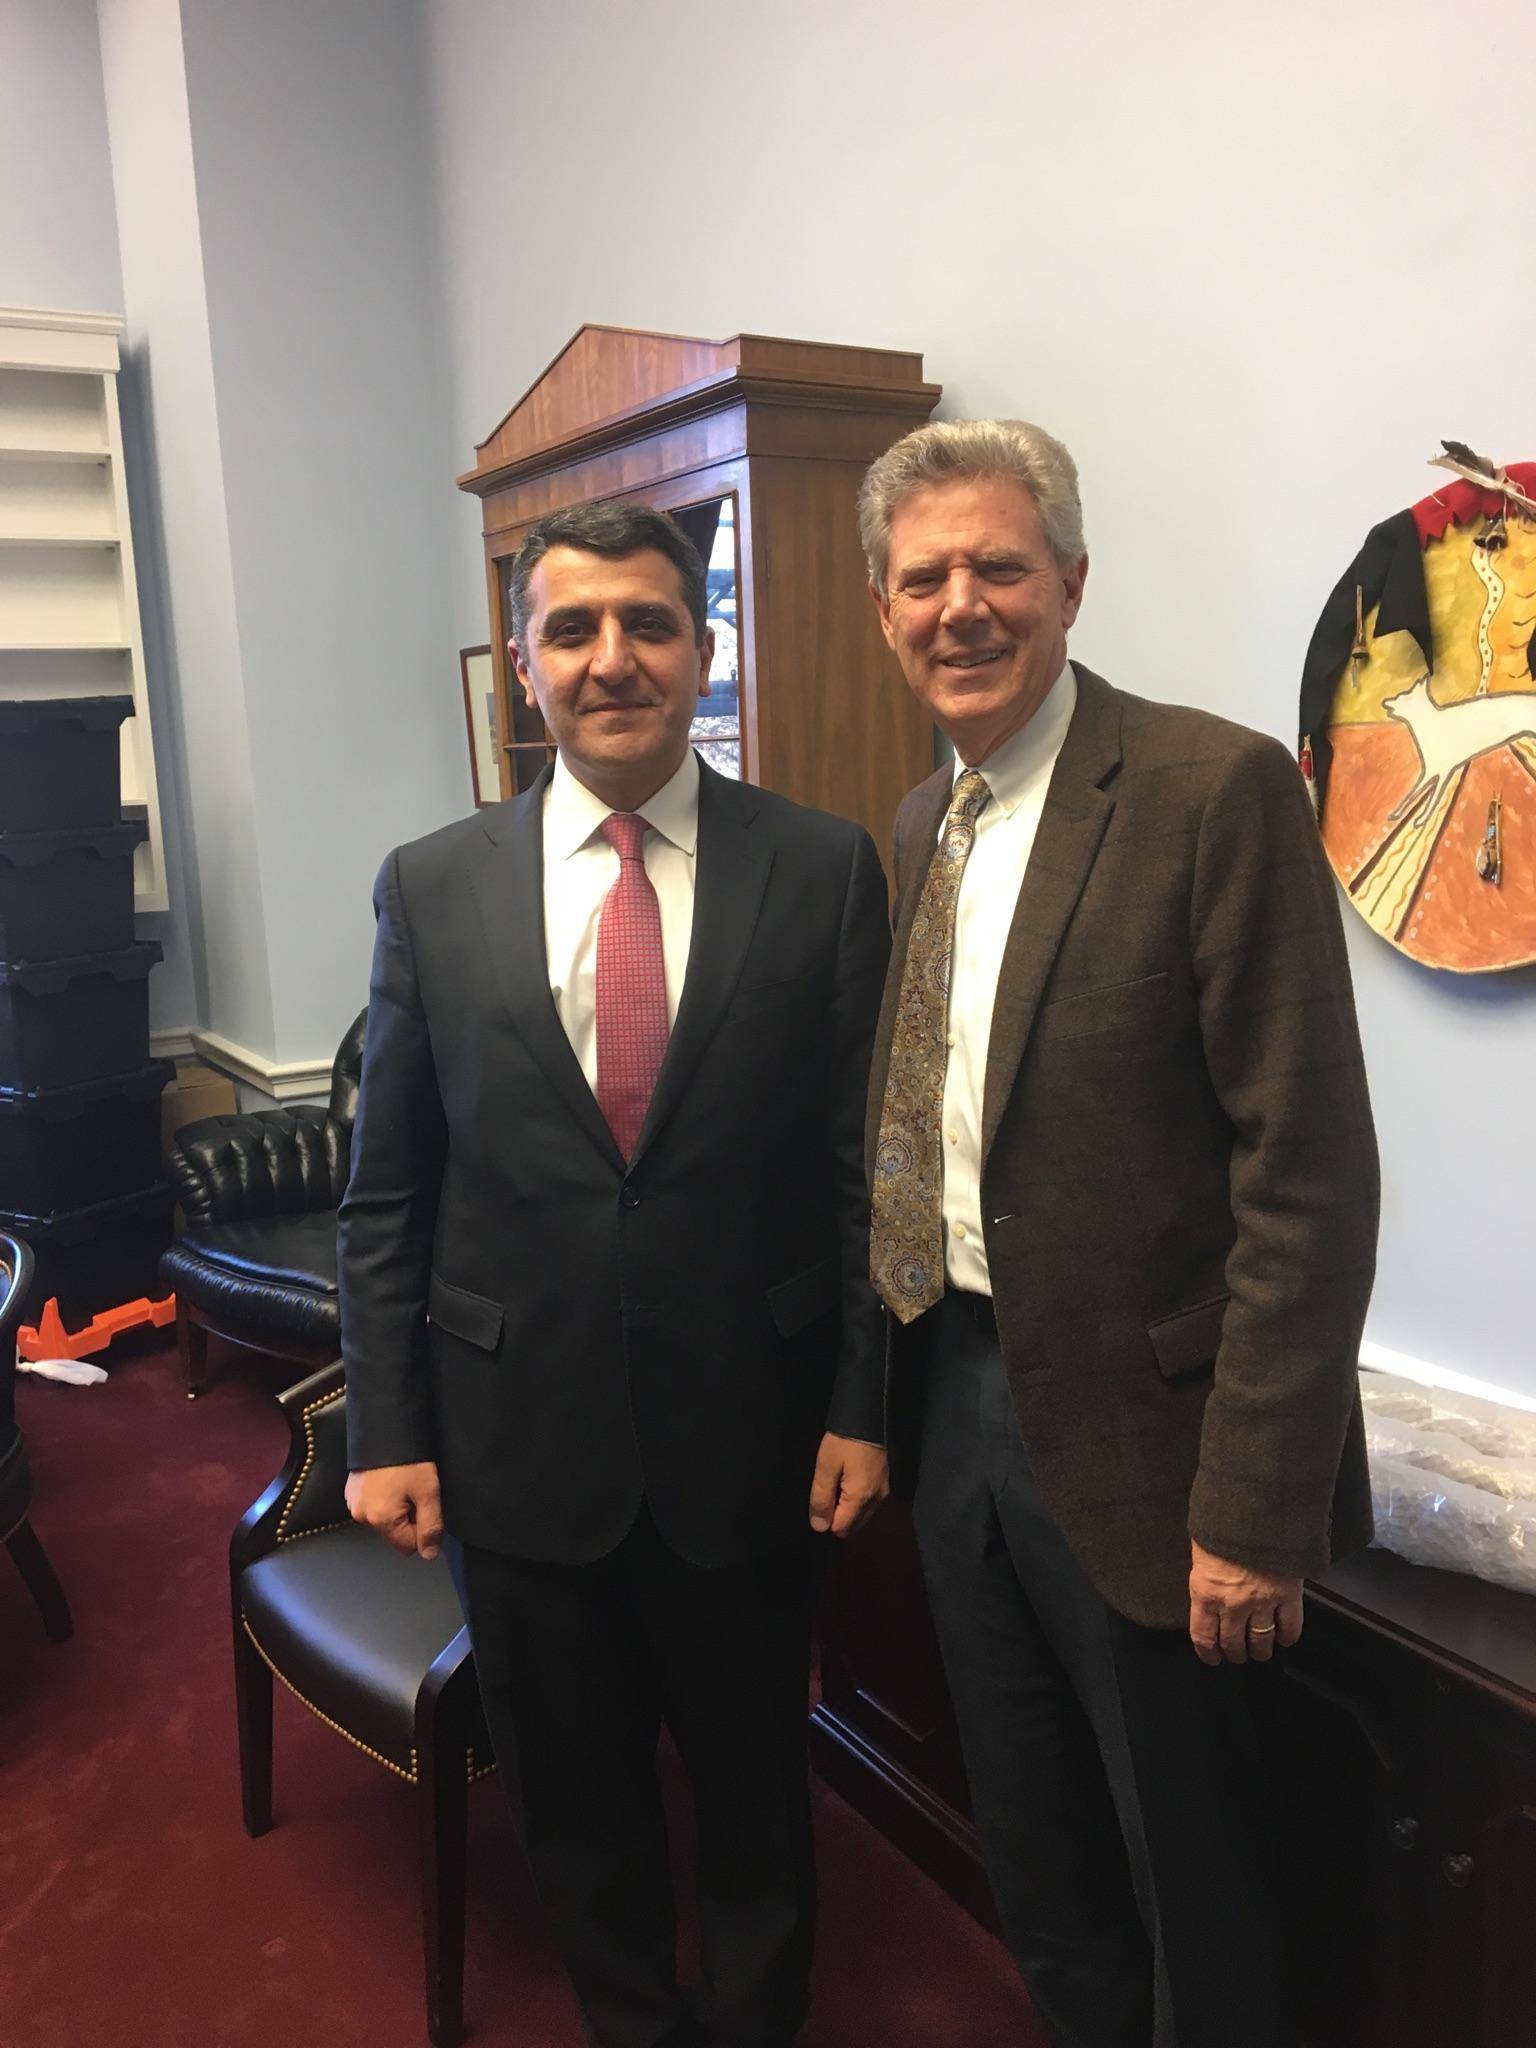 Ambassador Nersesyan met with Congressman Frank Pallone, Co-Chair of the Congressional Caucus on Armenian Issues